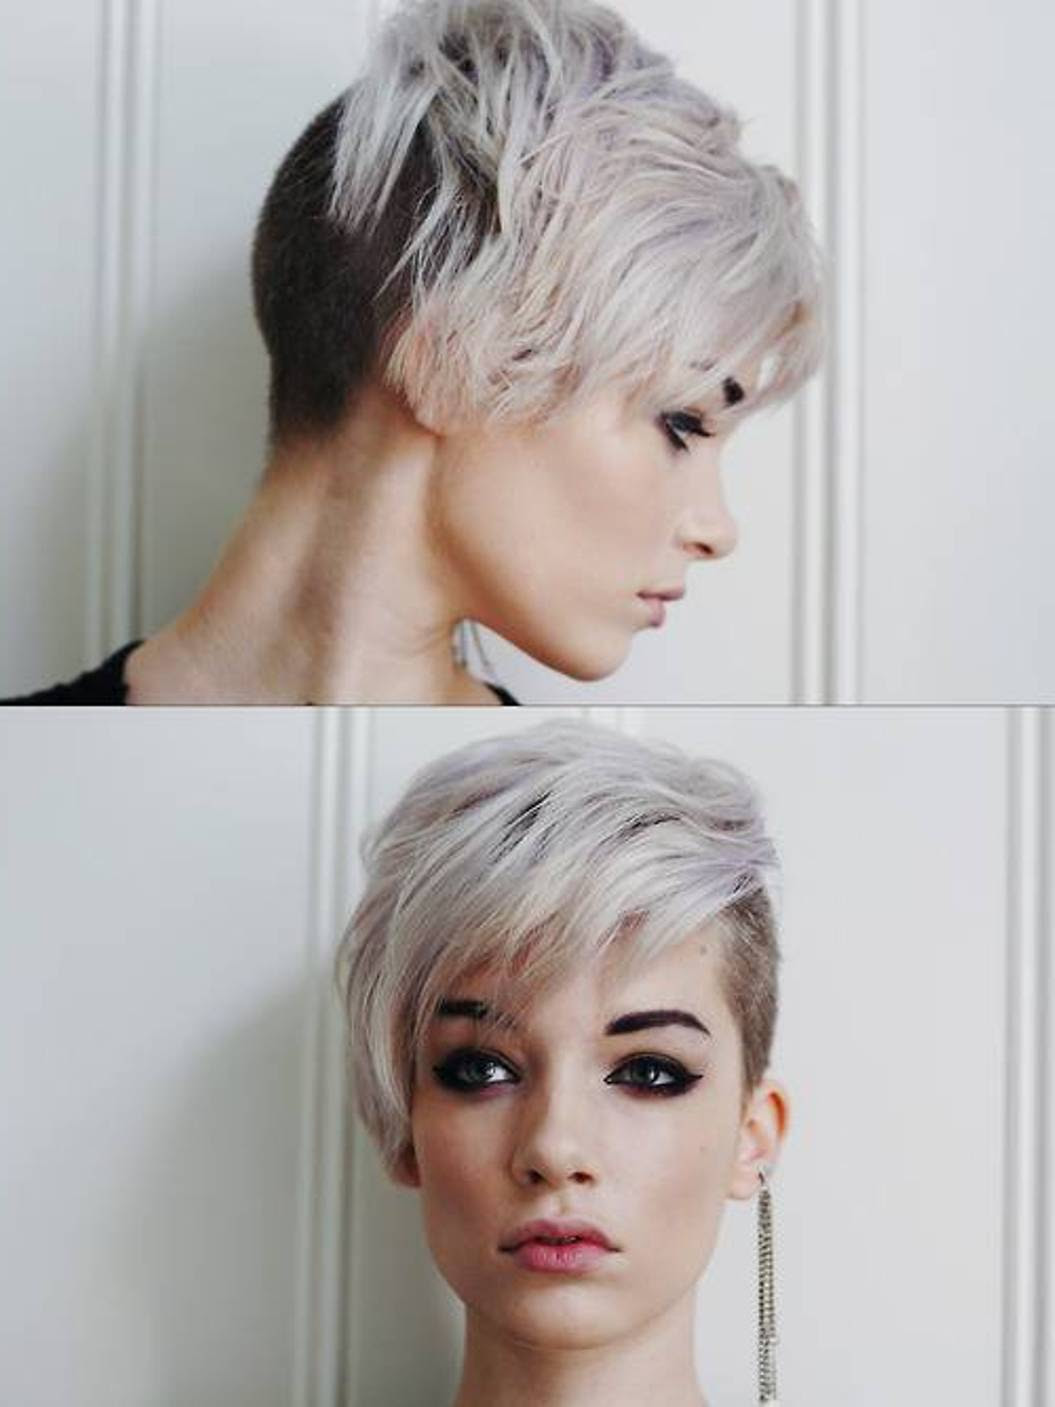 44 Girl Hairstyles Shaved Side Amazing Style